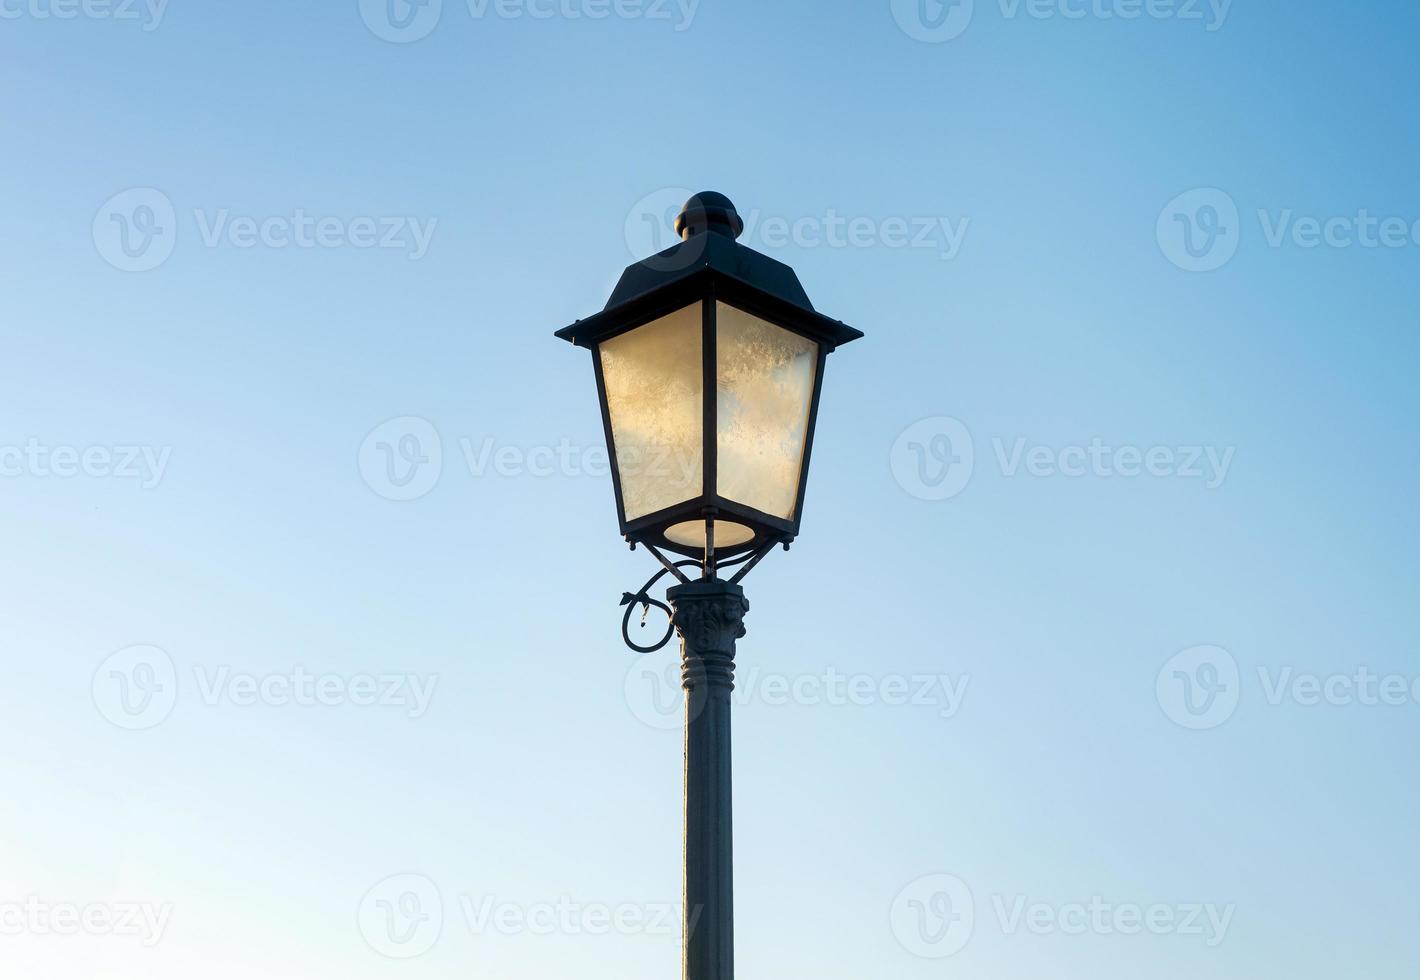 photo of an old styled street lamp against a clear blue sky